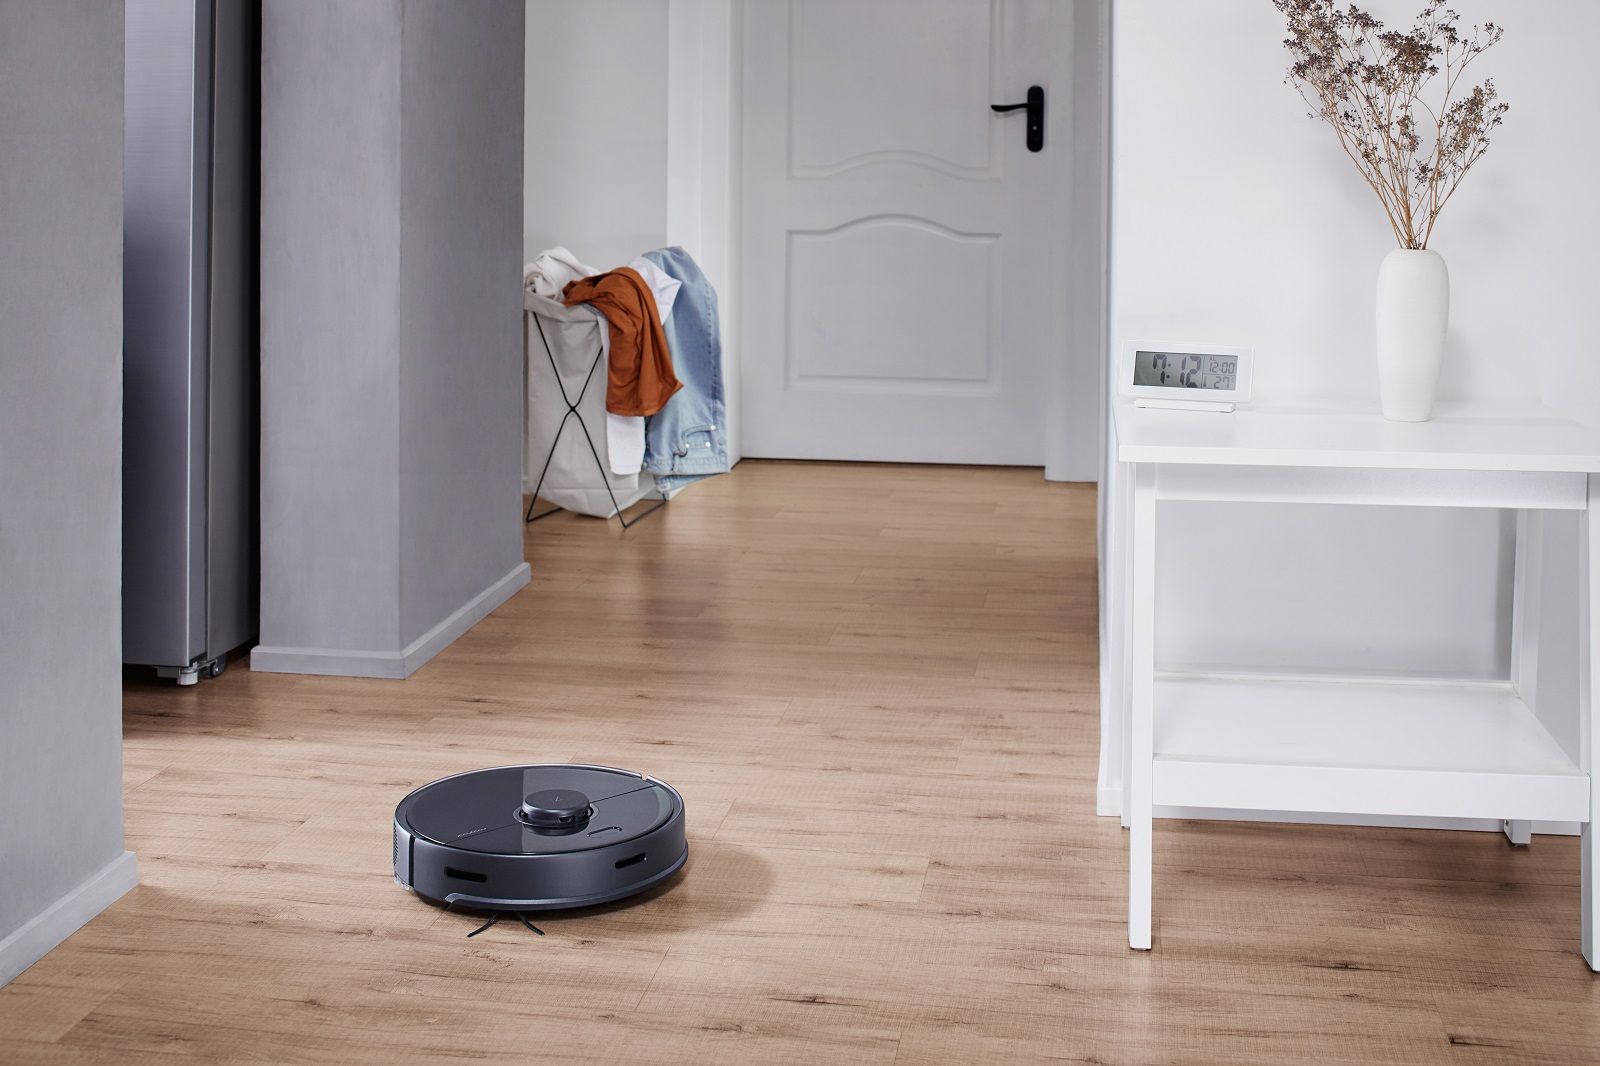 Roborock Launches A New And Improved Robot Vacuum In The Form Of The S5 Max image 1